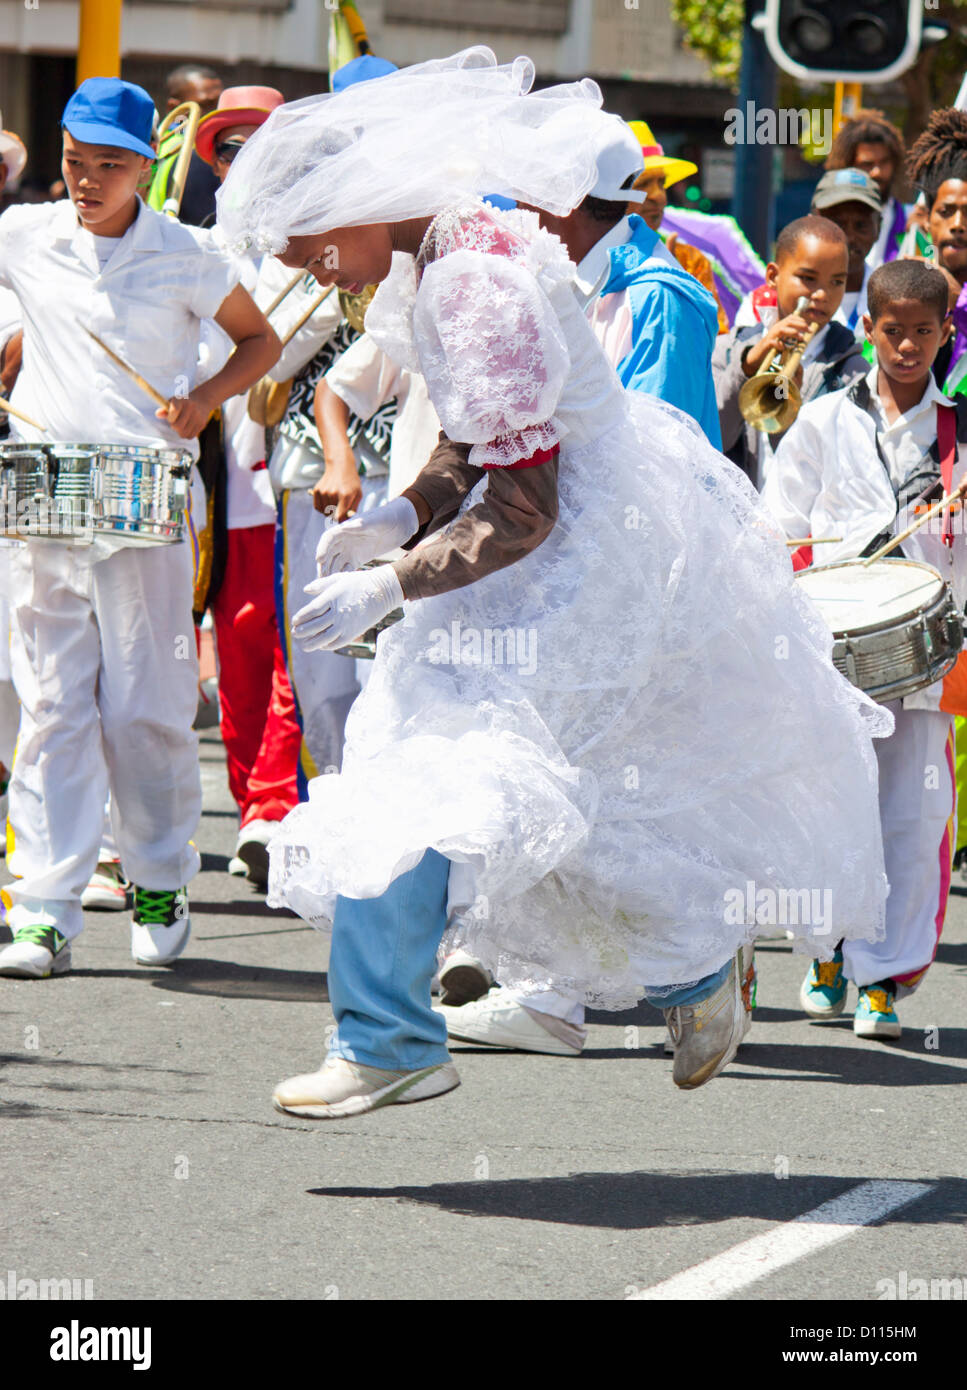 Man dressed as bride leaping to the beat of the carnival music Stock Photo